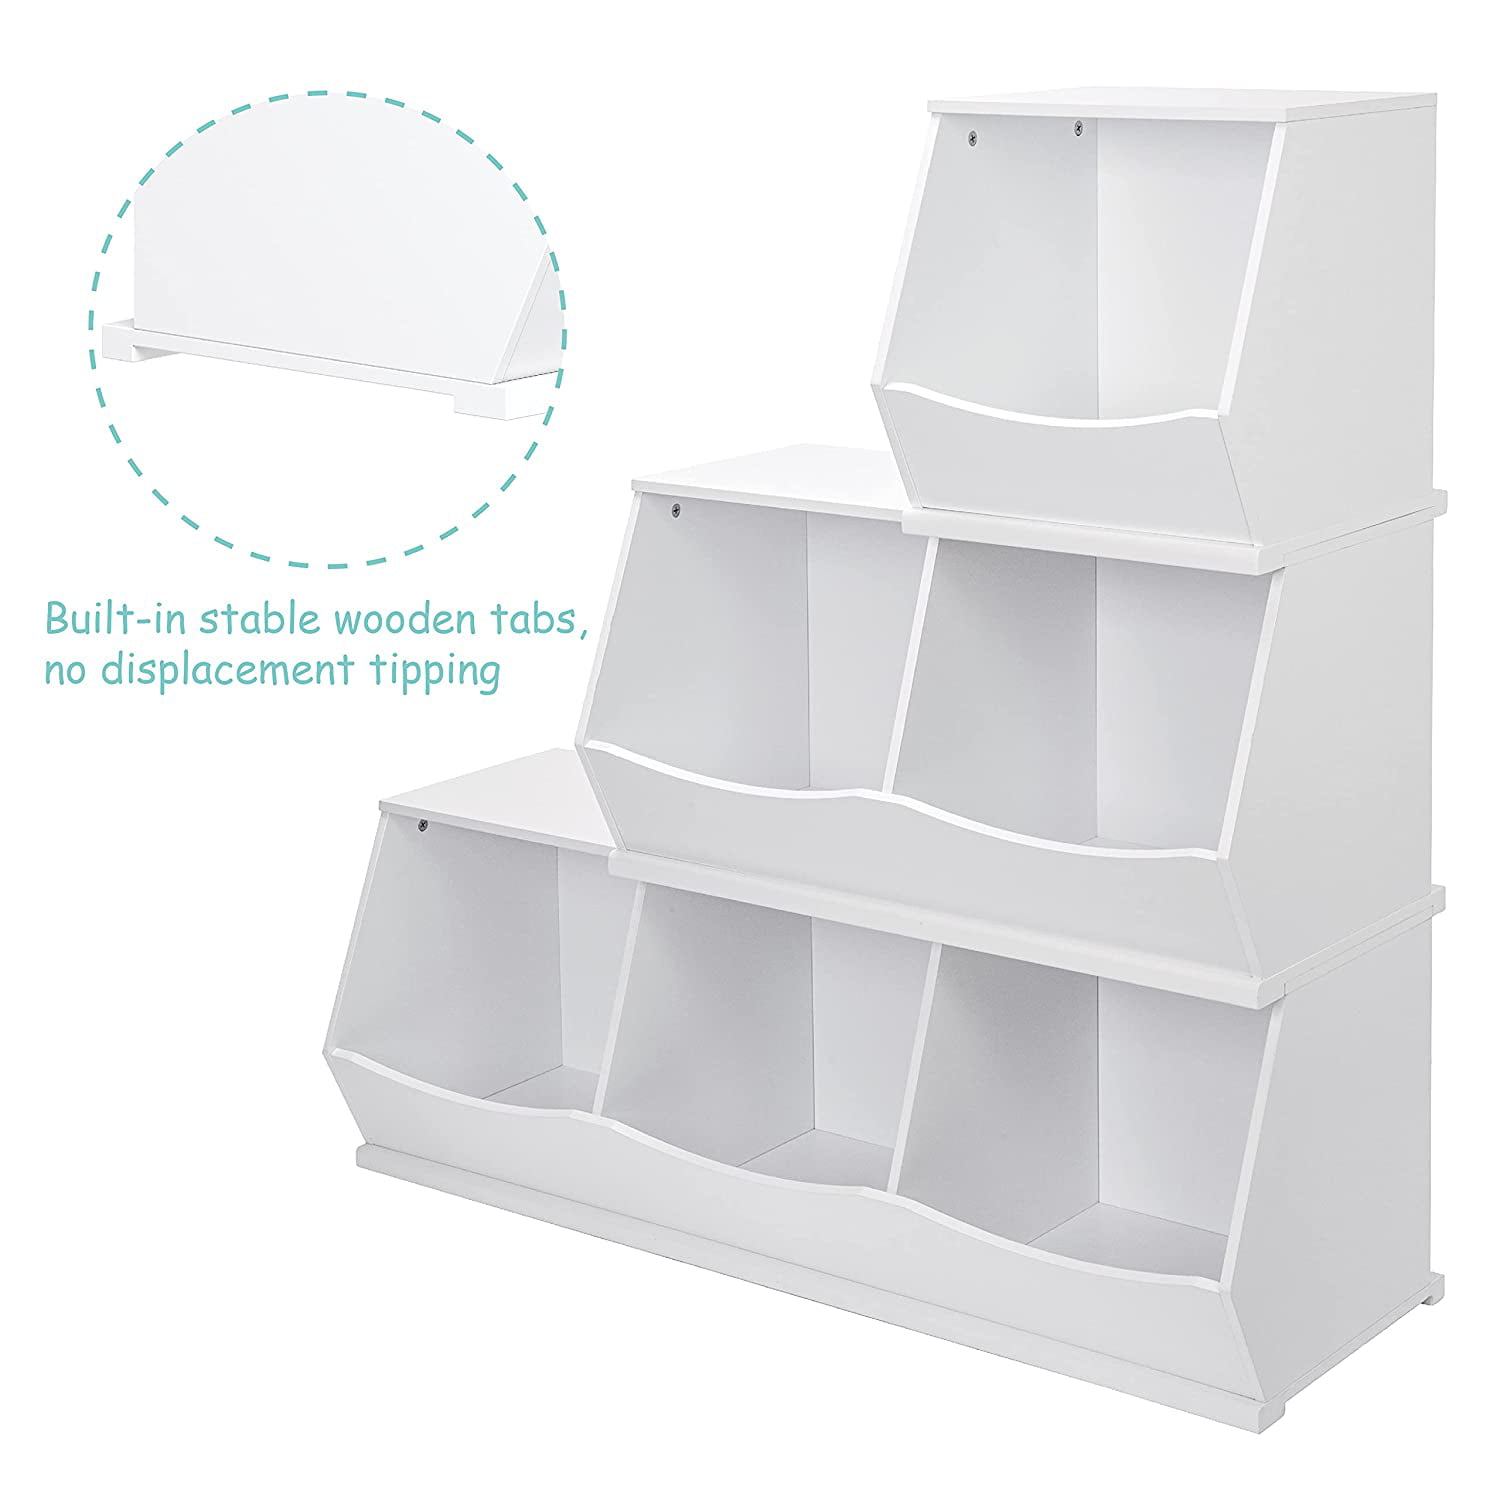 UTEX Toy Storage Organizer, 40 Kids Toy Storage Cubby with Bins,Toy Boxes  and Storage for Playroom,Bedroom,Nursery School,White